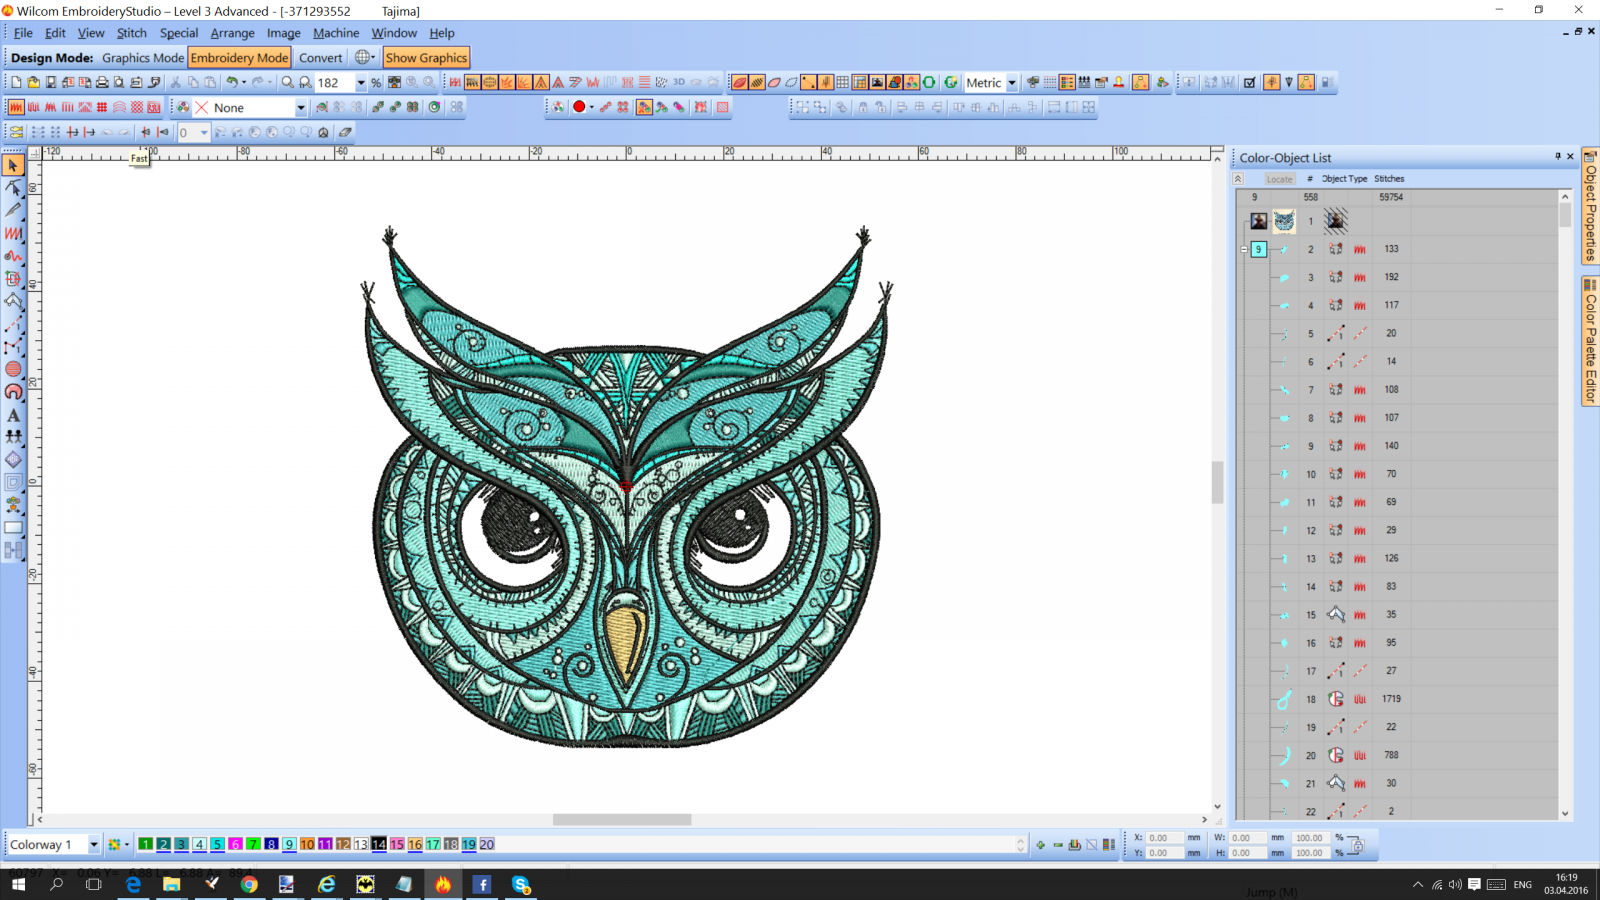 Mosaic Owl embroidery design preview